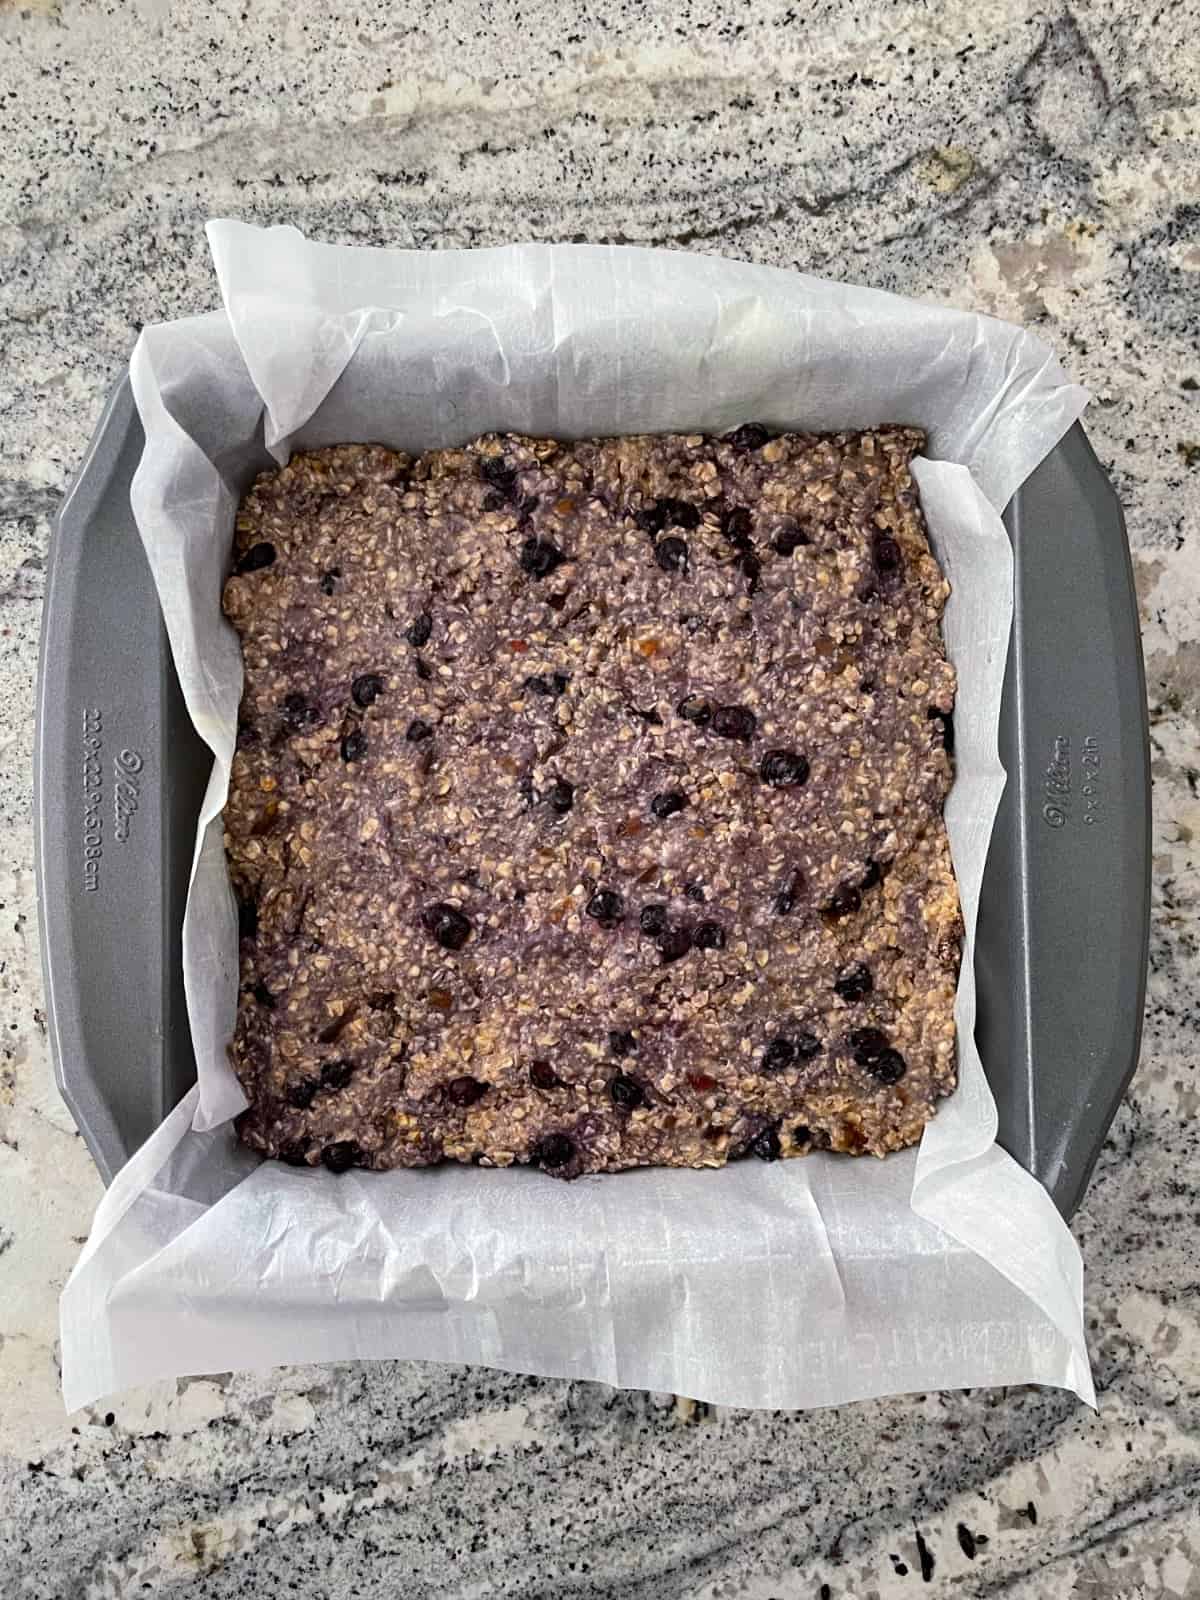 Unbaked blueberry banana oat squares in 8-inch square baking pan on granite counter.